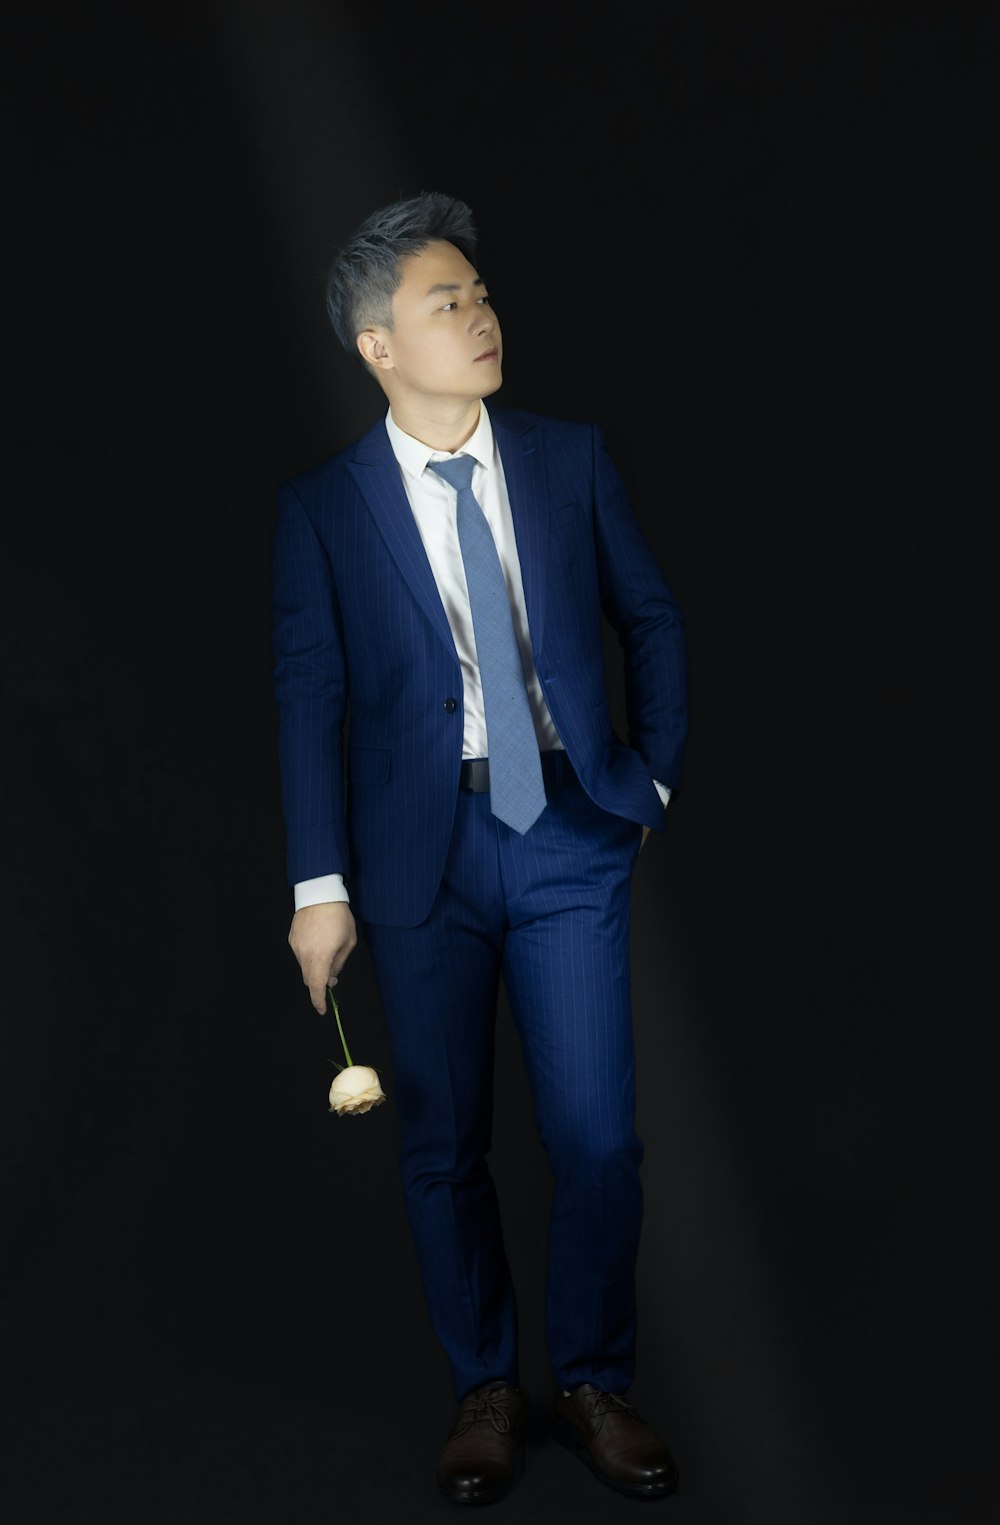 a man in a suit and tie holding a rose